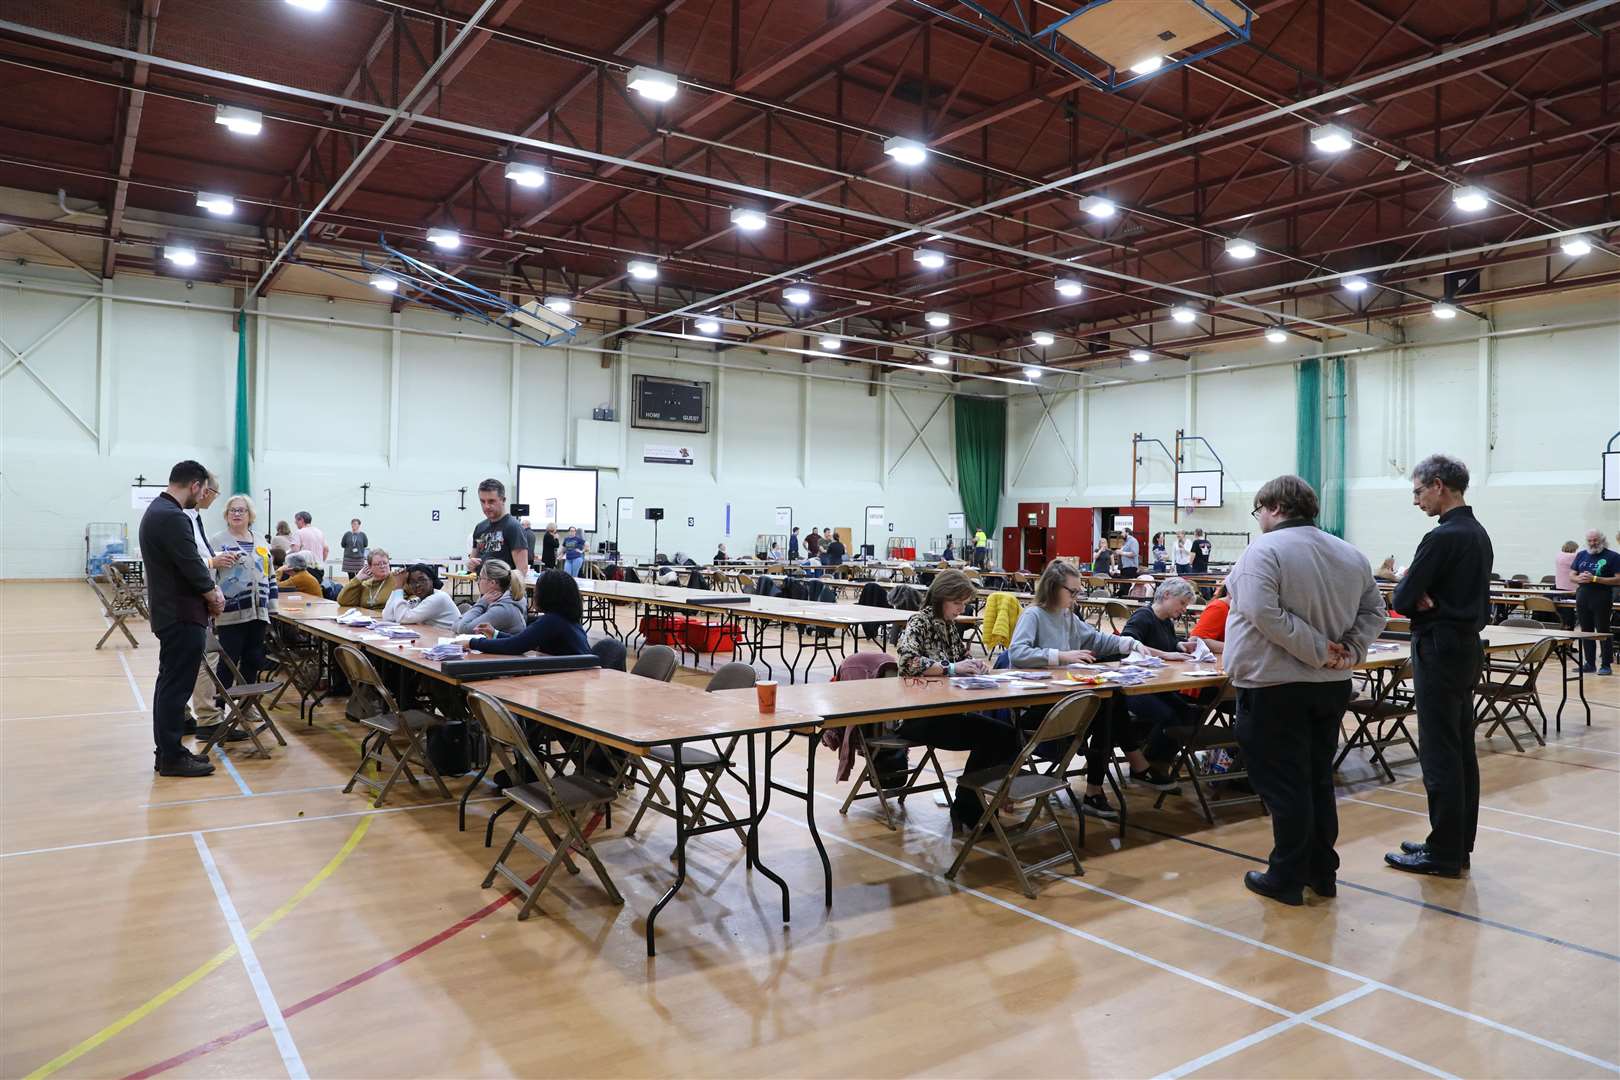 The count was held at the Stour Centre